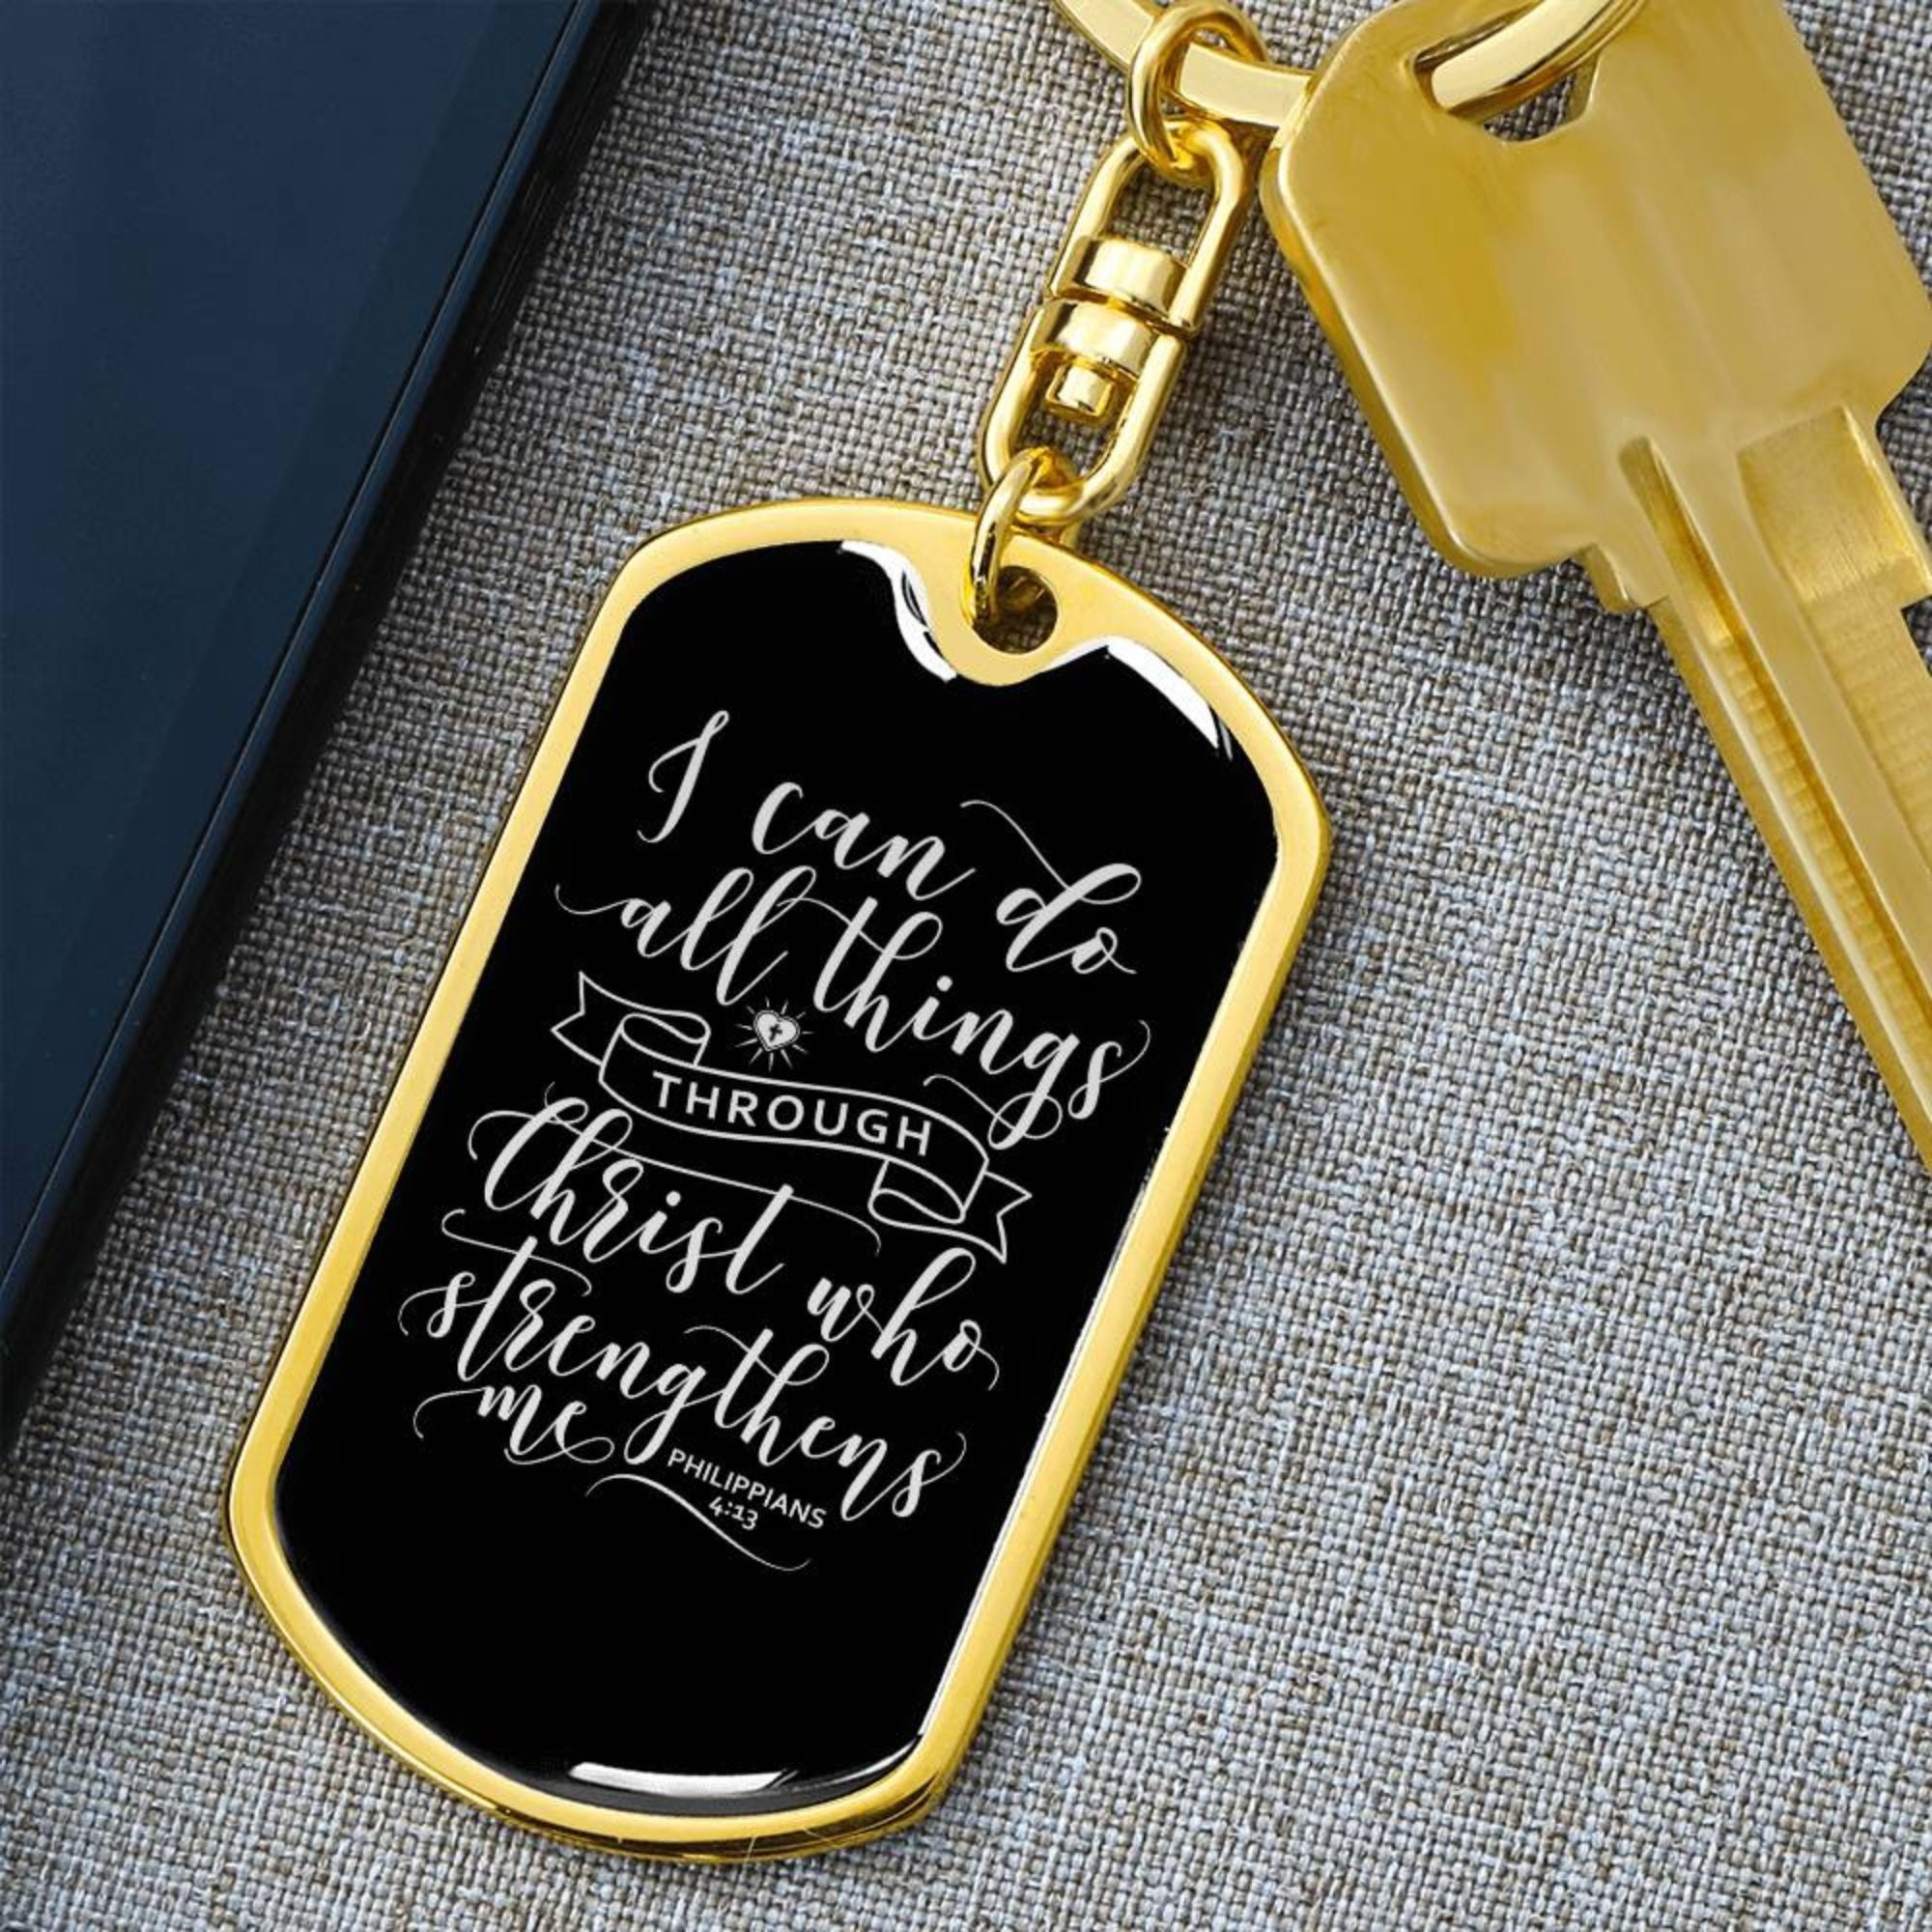 I Can Do All Things - Gold Dog Tag with Swivel Keychain Engraving: No Jesus Passion Apparel